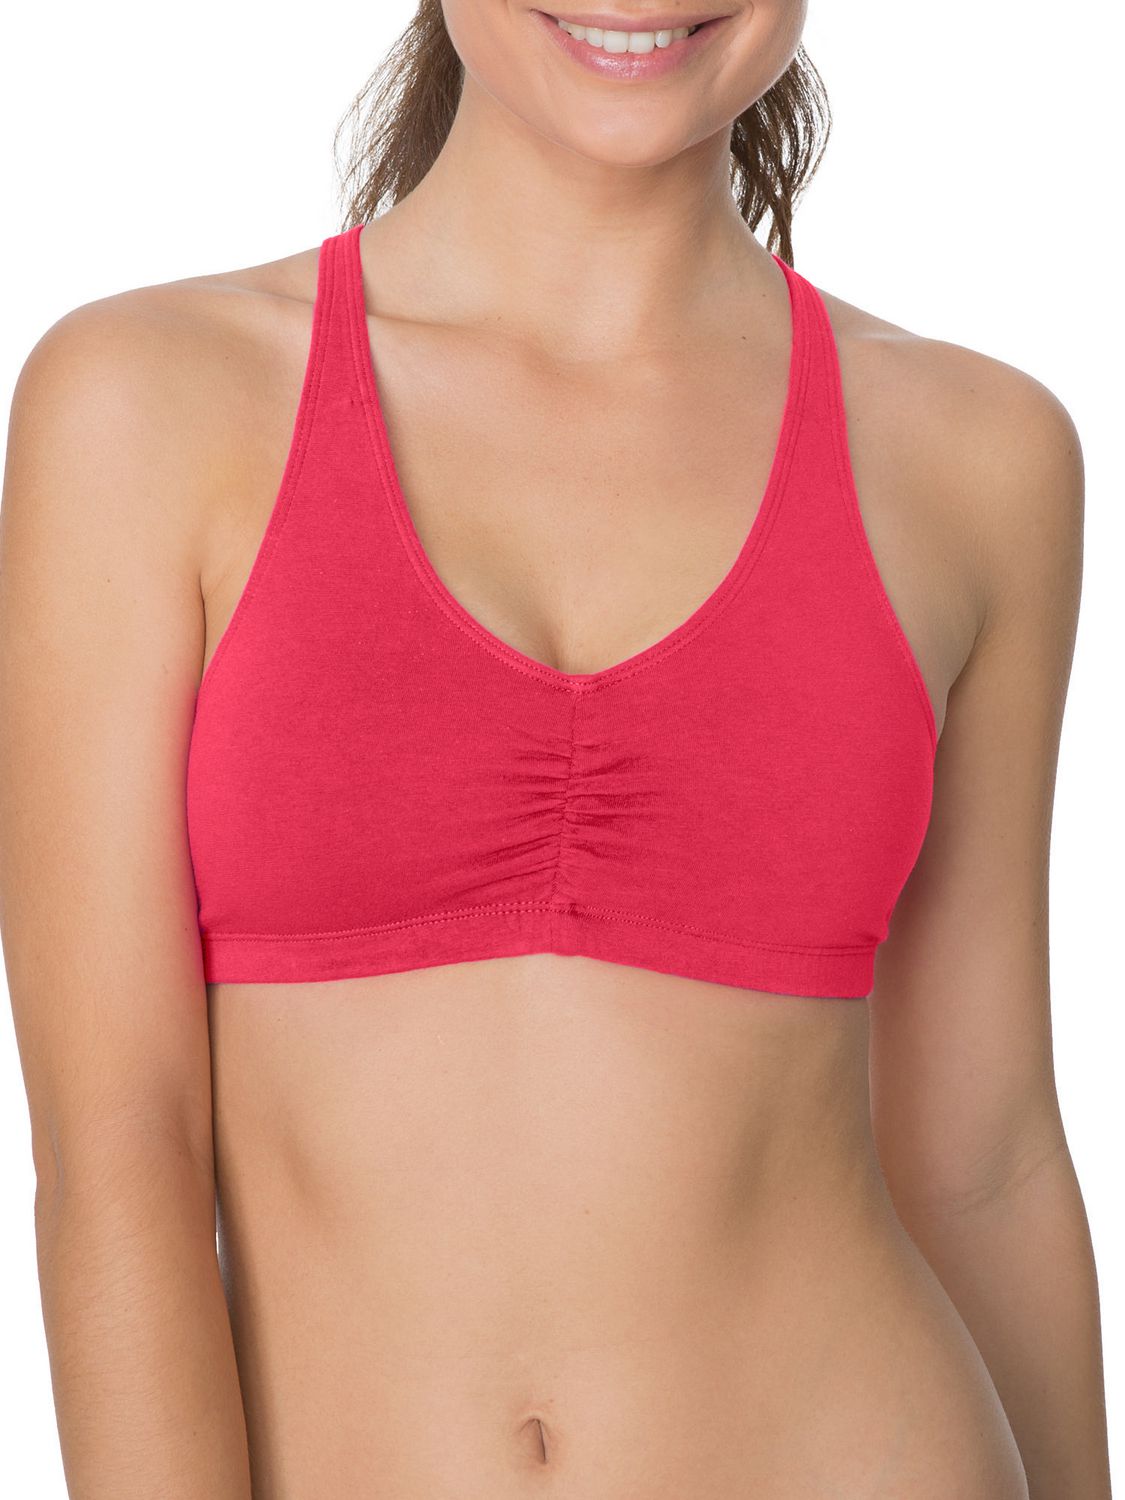 Women Sports Bra Fruit of the Loom Spaghetti Strap Cotton Pullover 3pack  Red/White/black - A. Ally & Sons